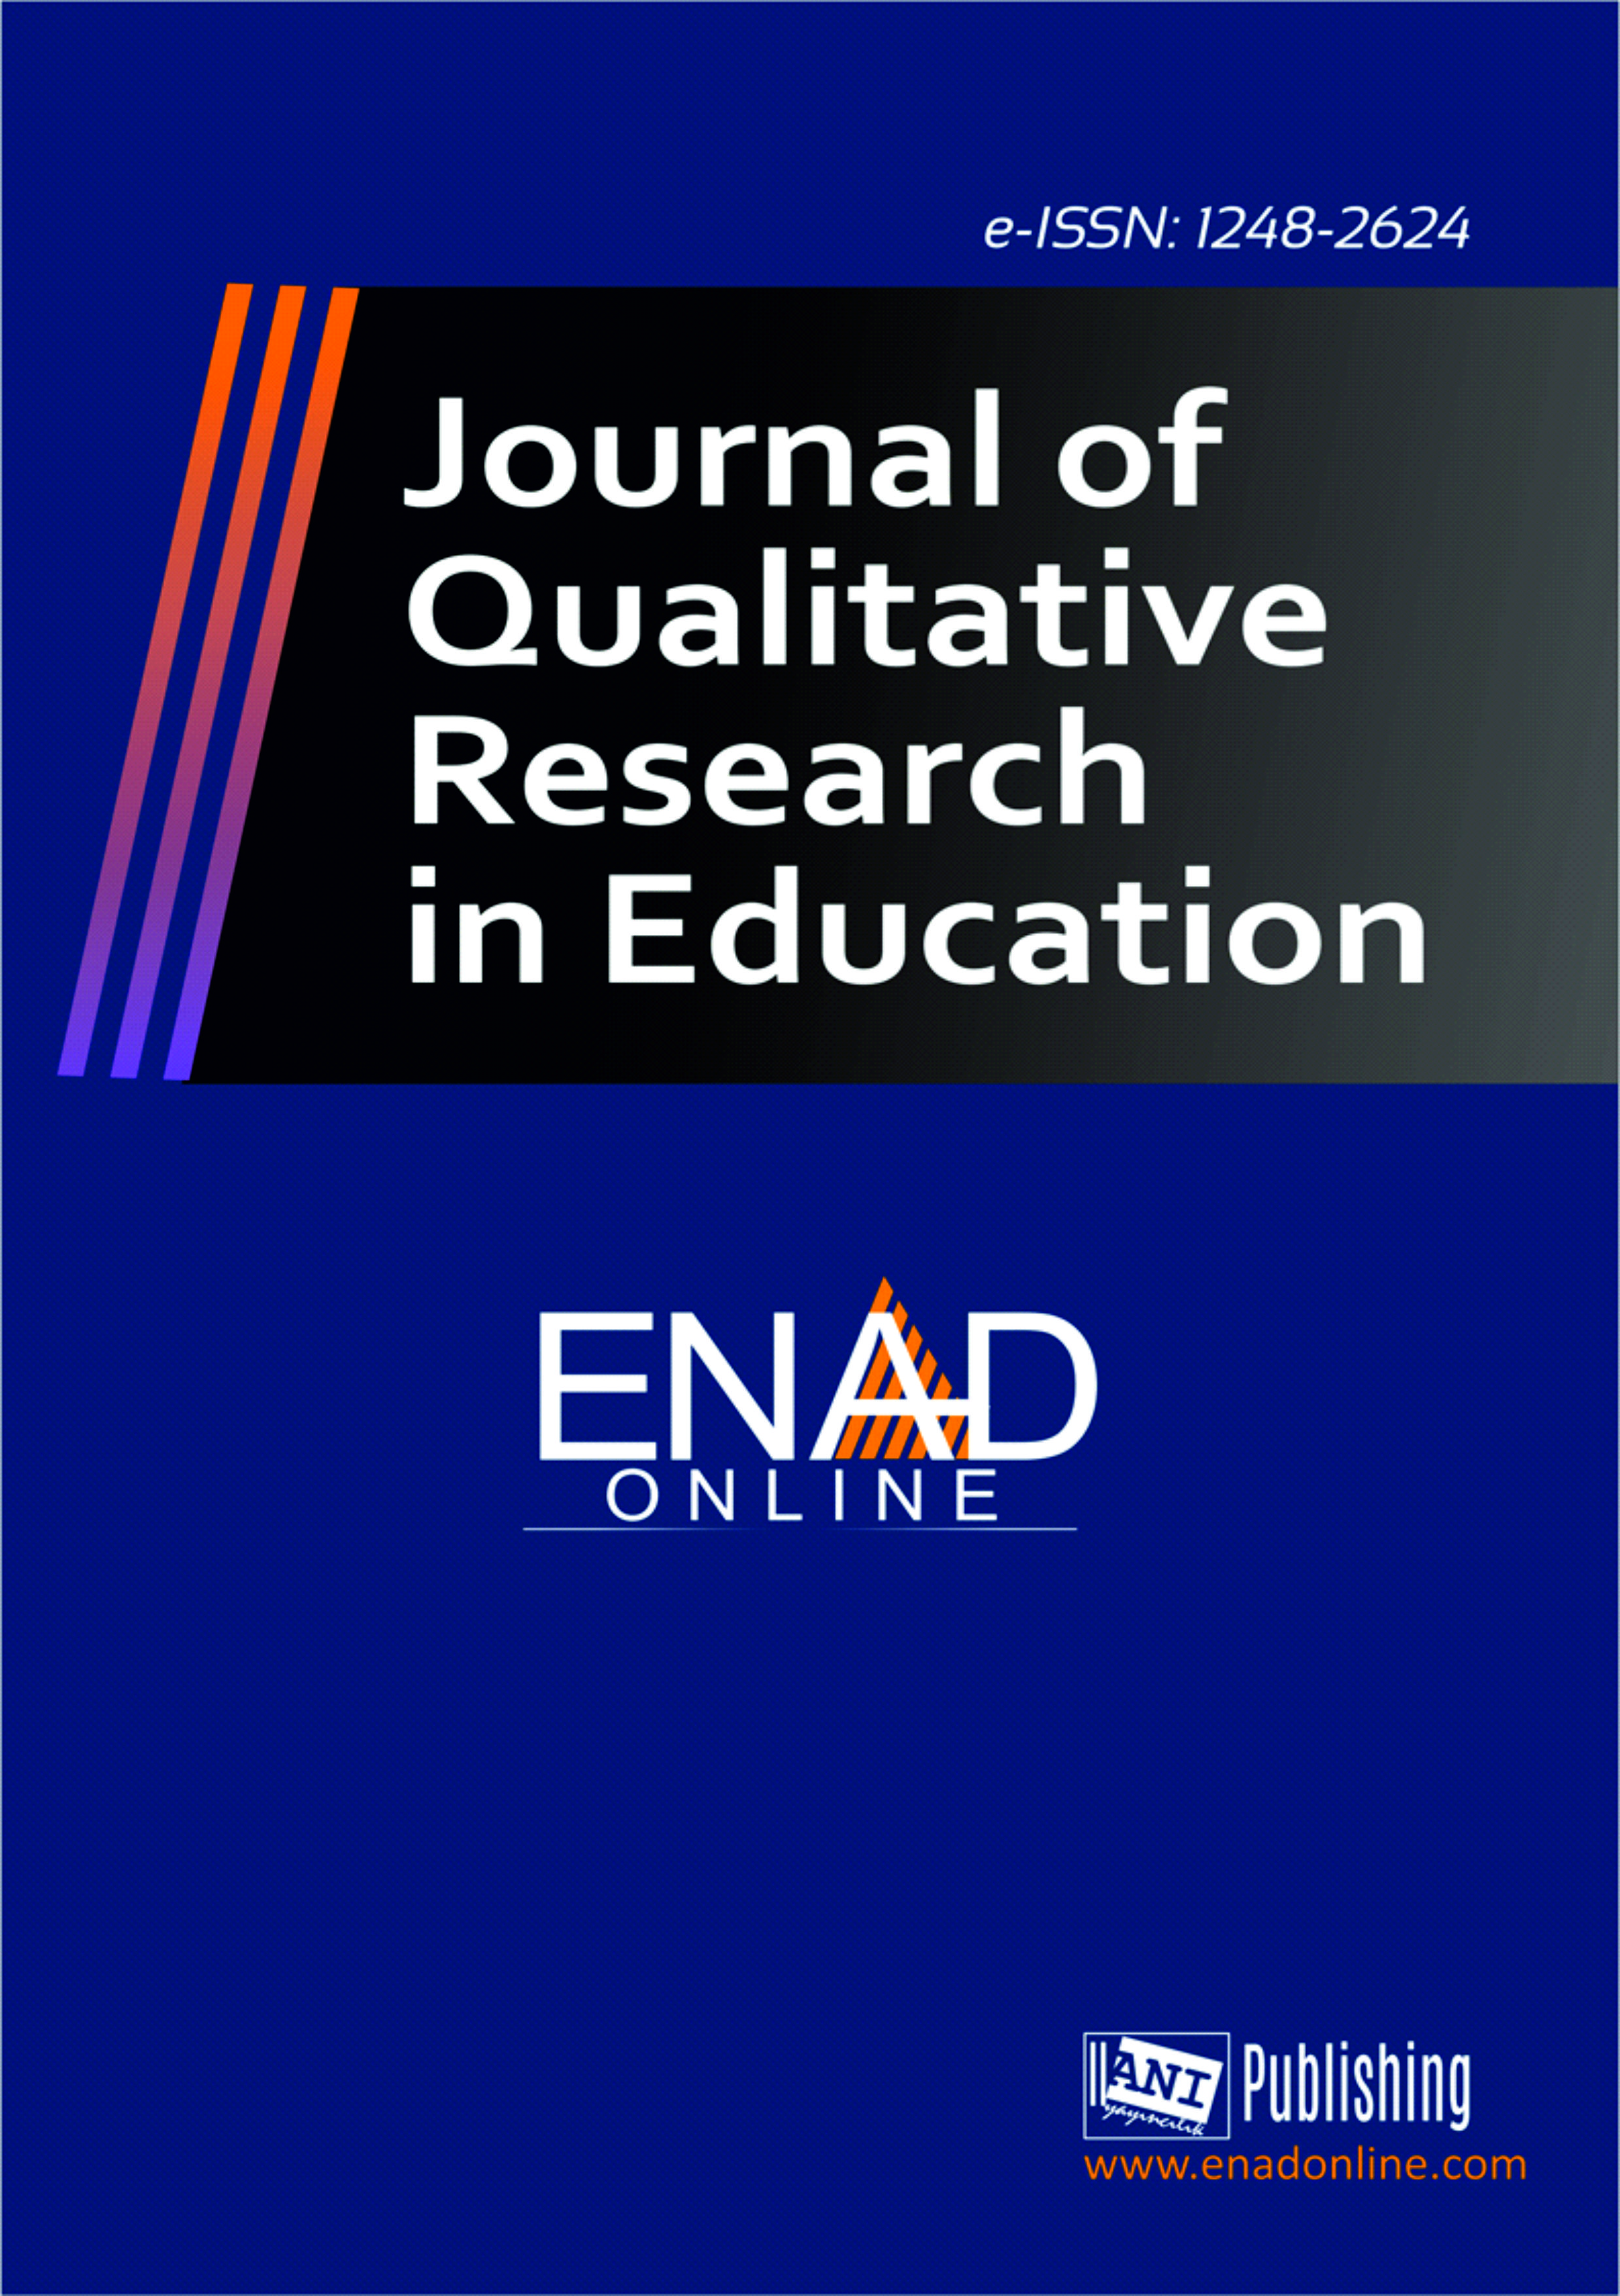 					View Issue 31 (2022): Journal of Qualitative Research in Education
				